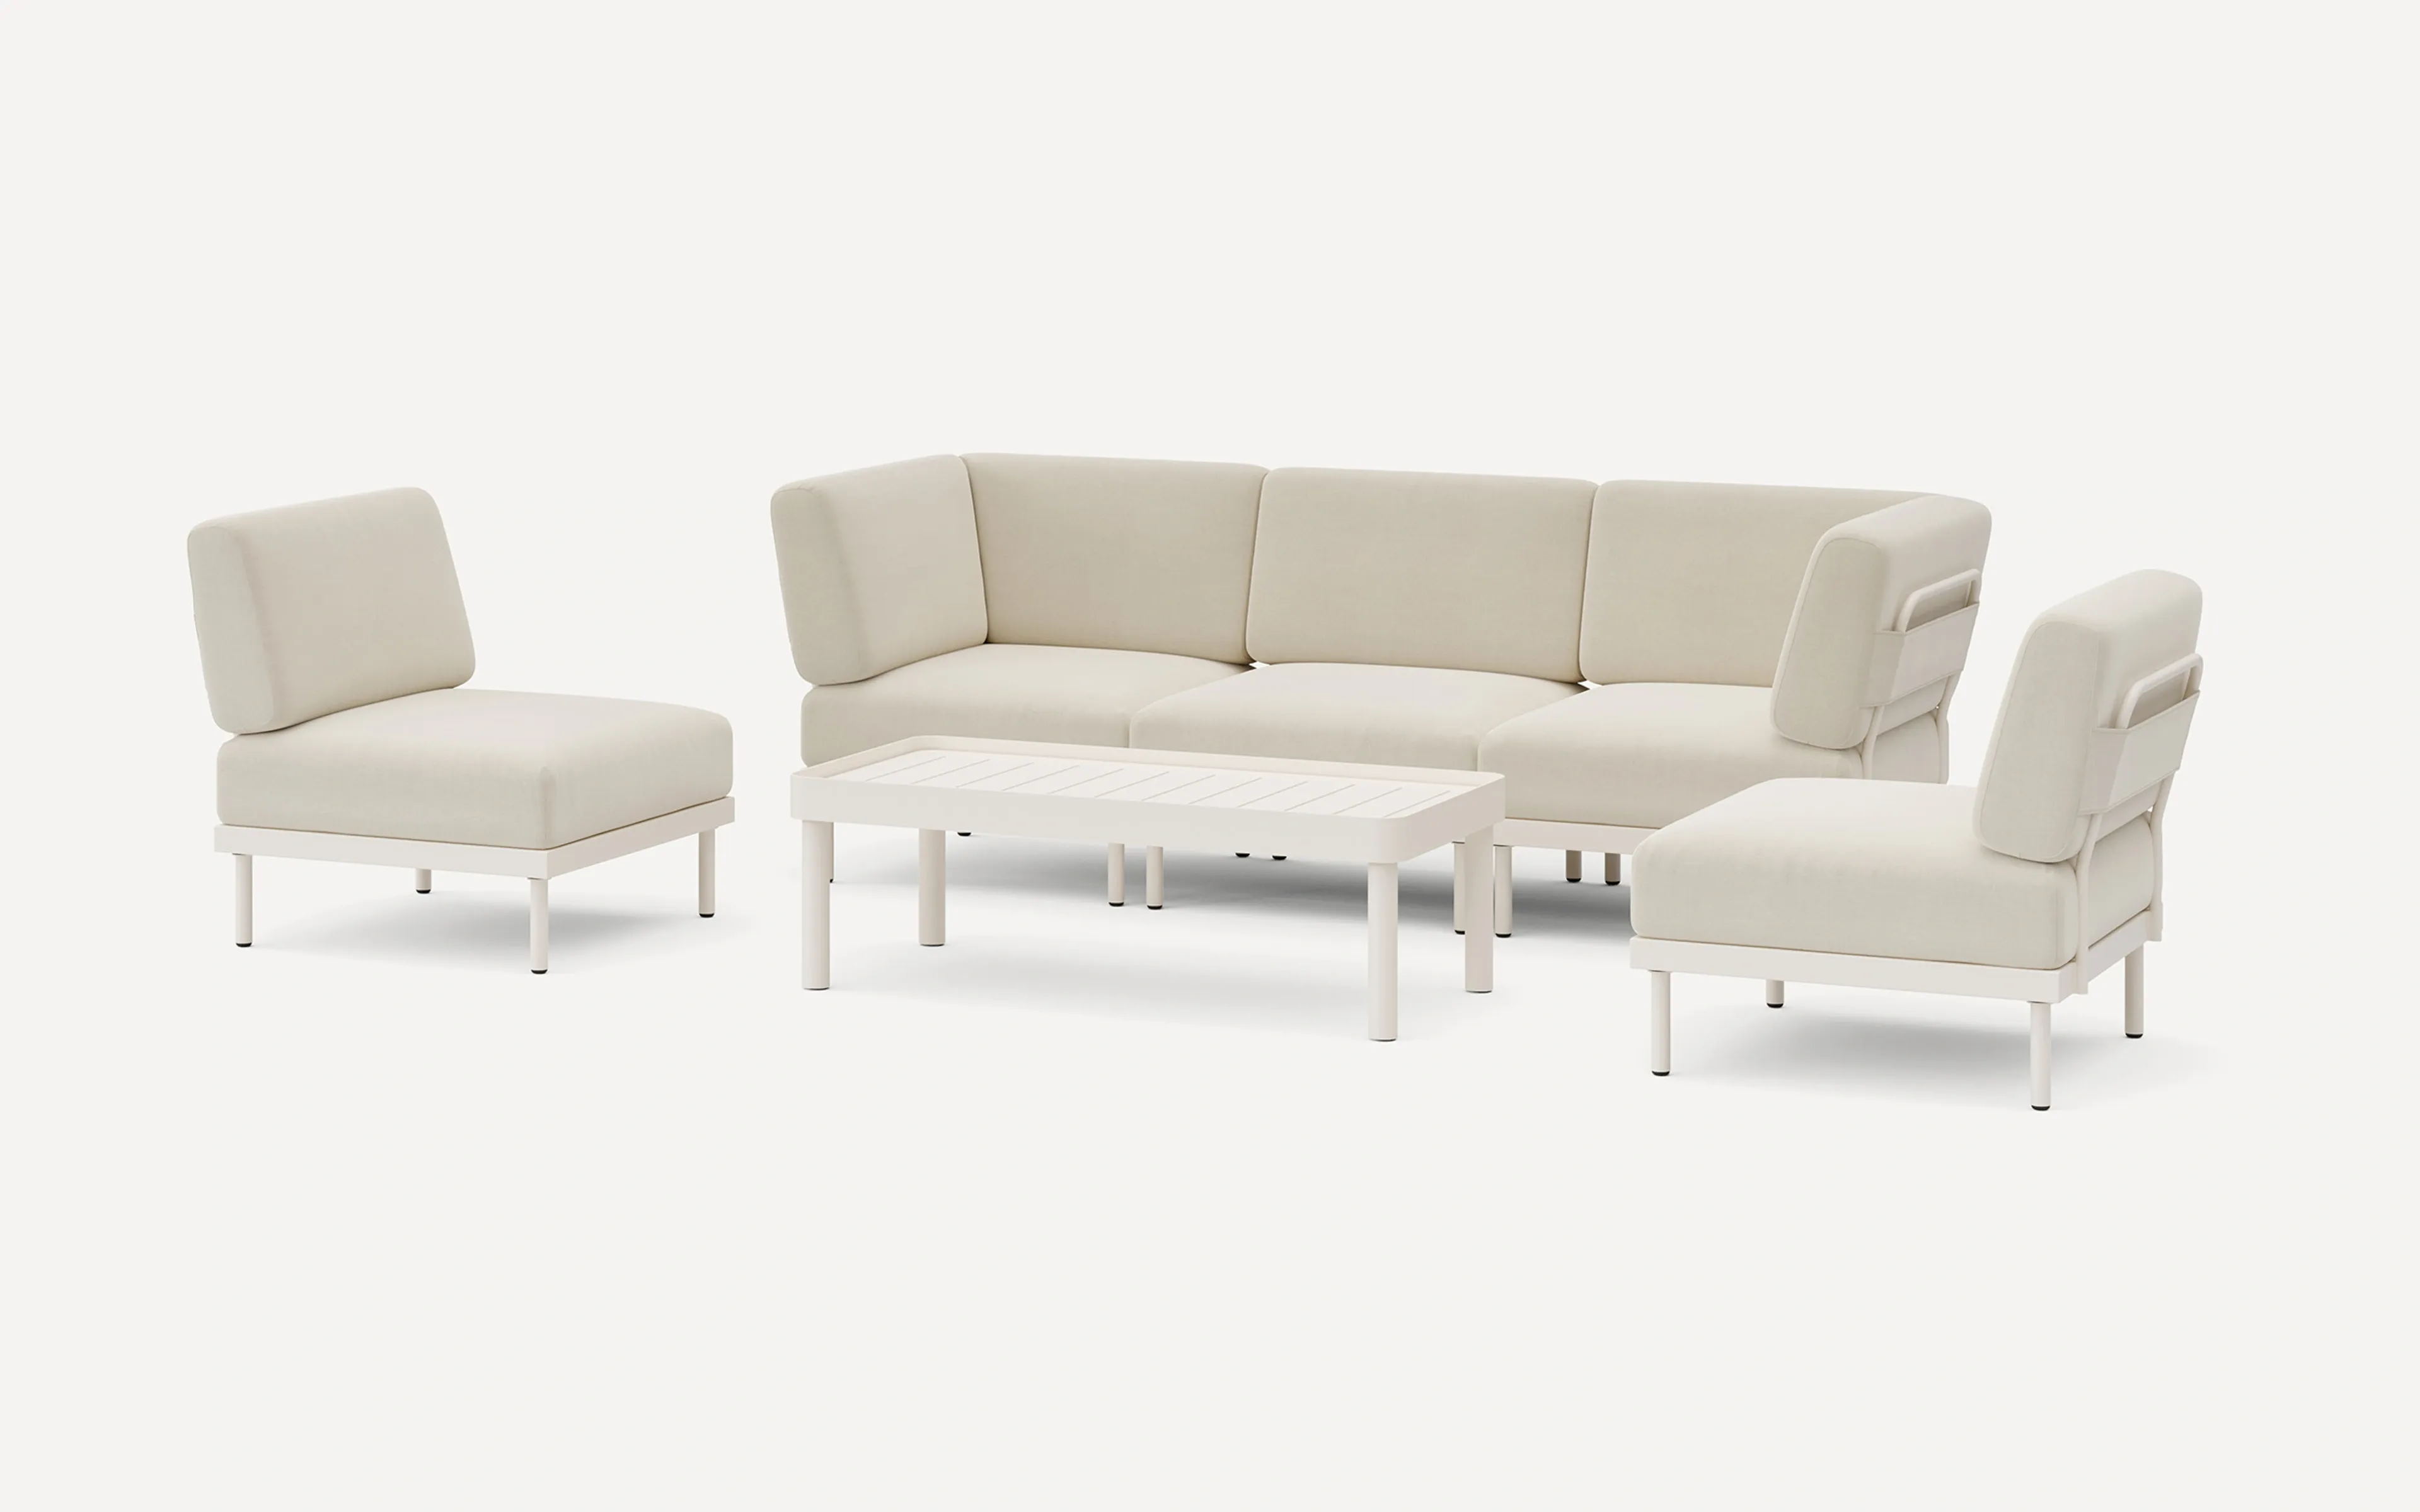 Relay Outdoor 3-Piece Sofa, 2 Chairs, & Coffee Table Set